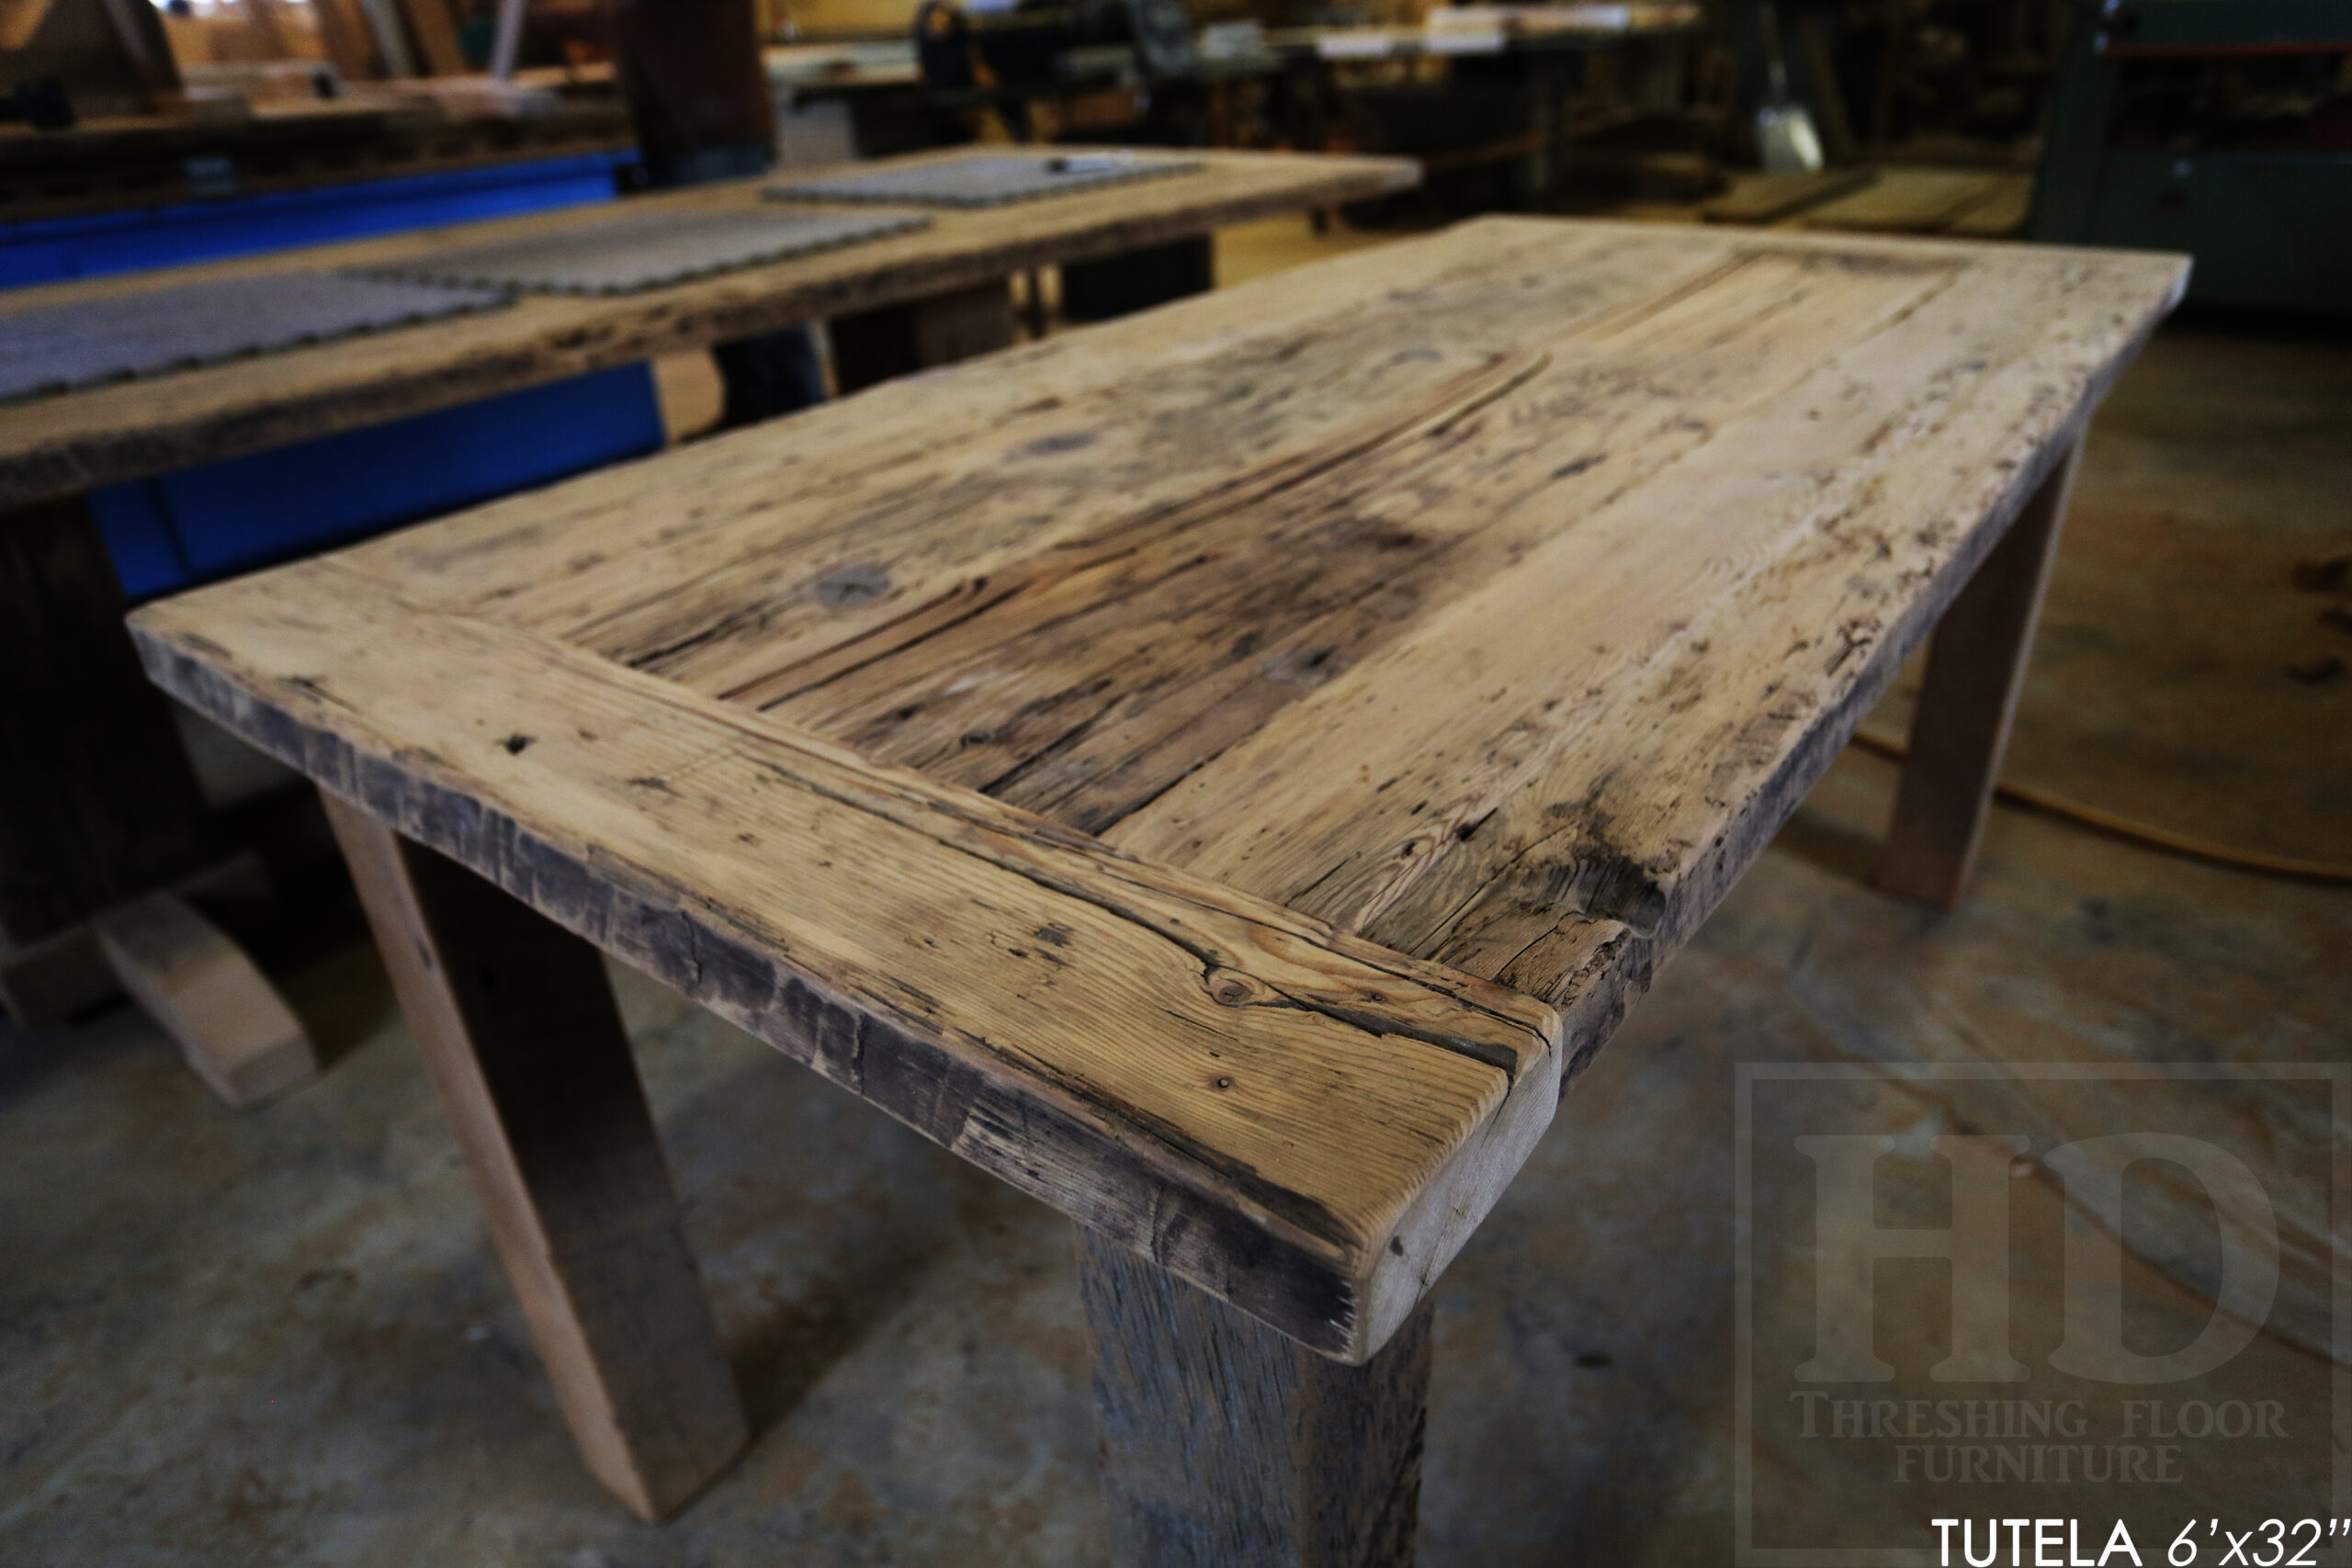 Harvest Table made from Reclaimed Wood by HD Threshing Floor Furniture / www.table.ca